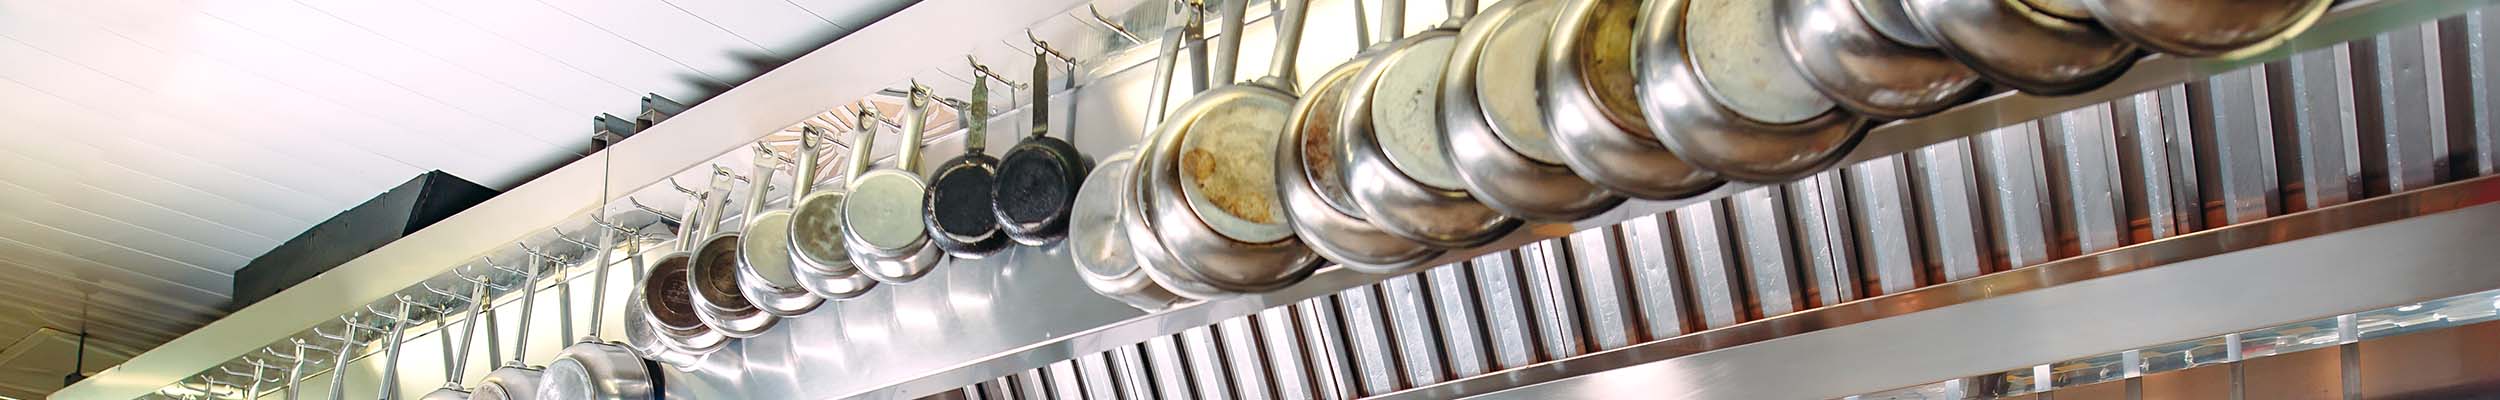 Dozens of pans hanging in a commercial kitchen